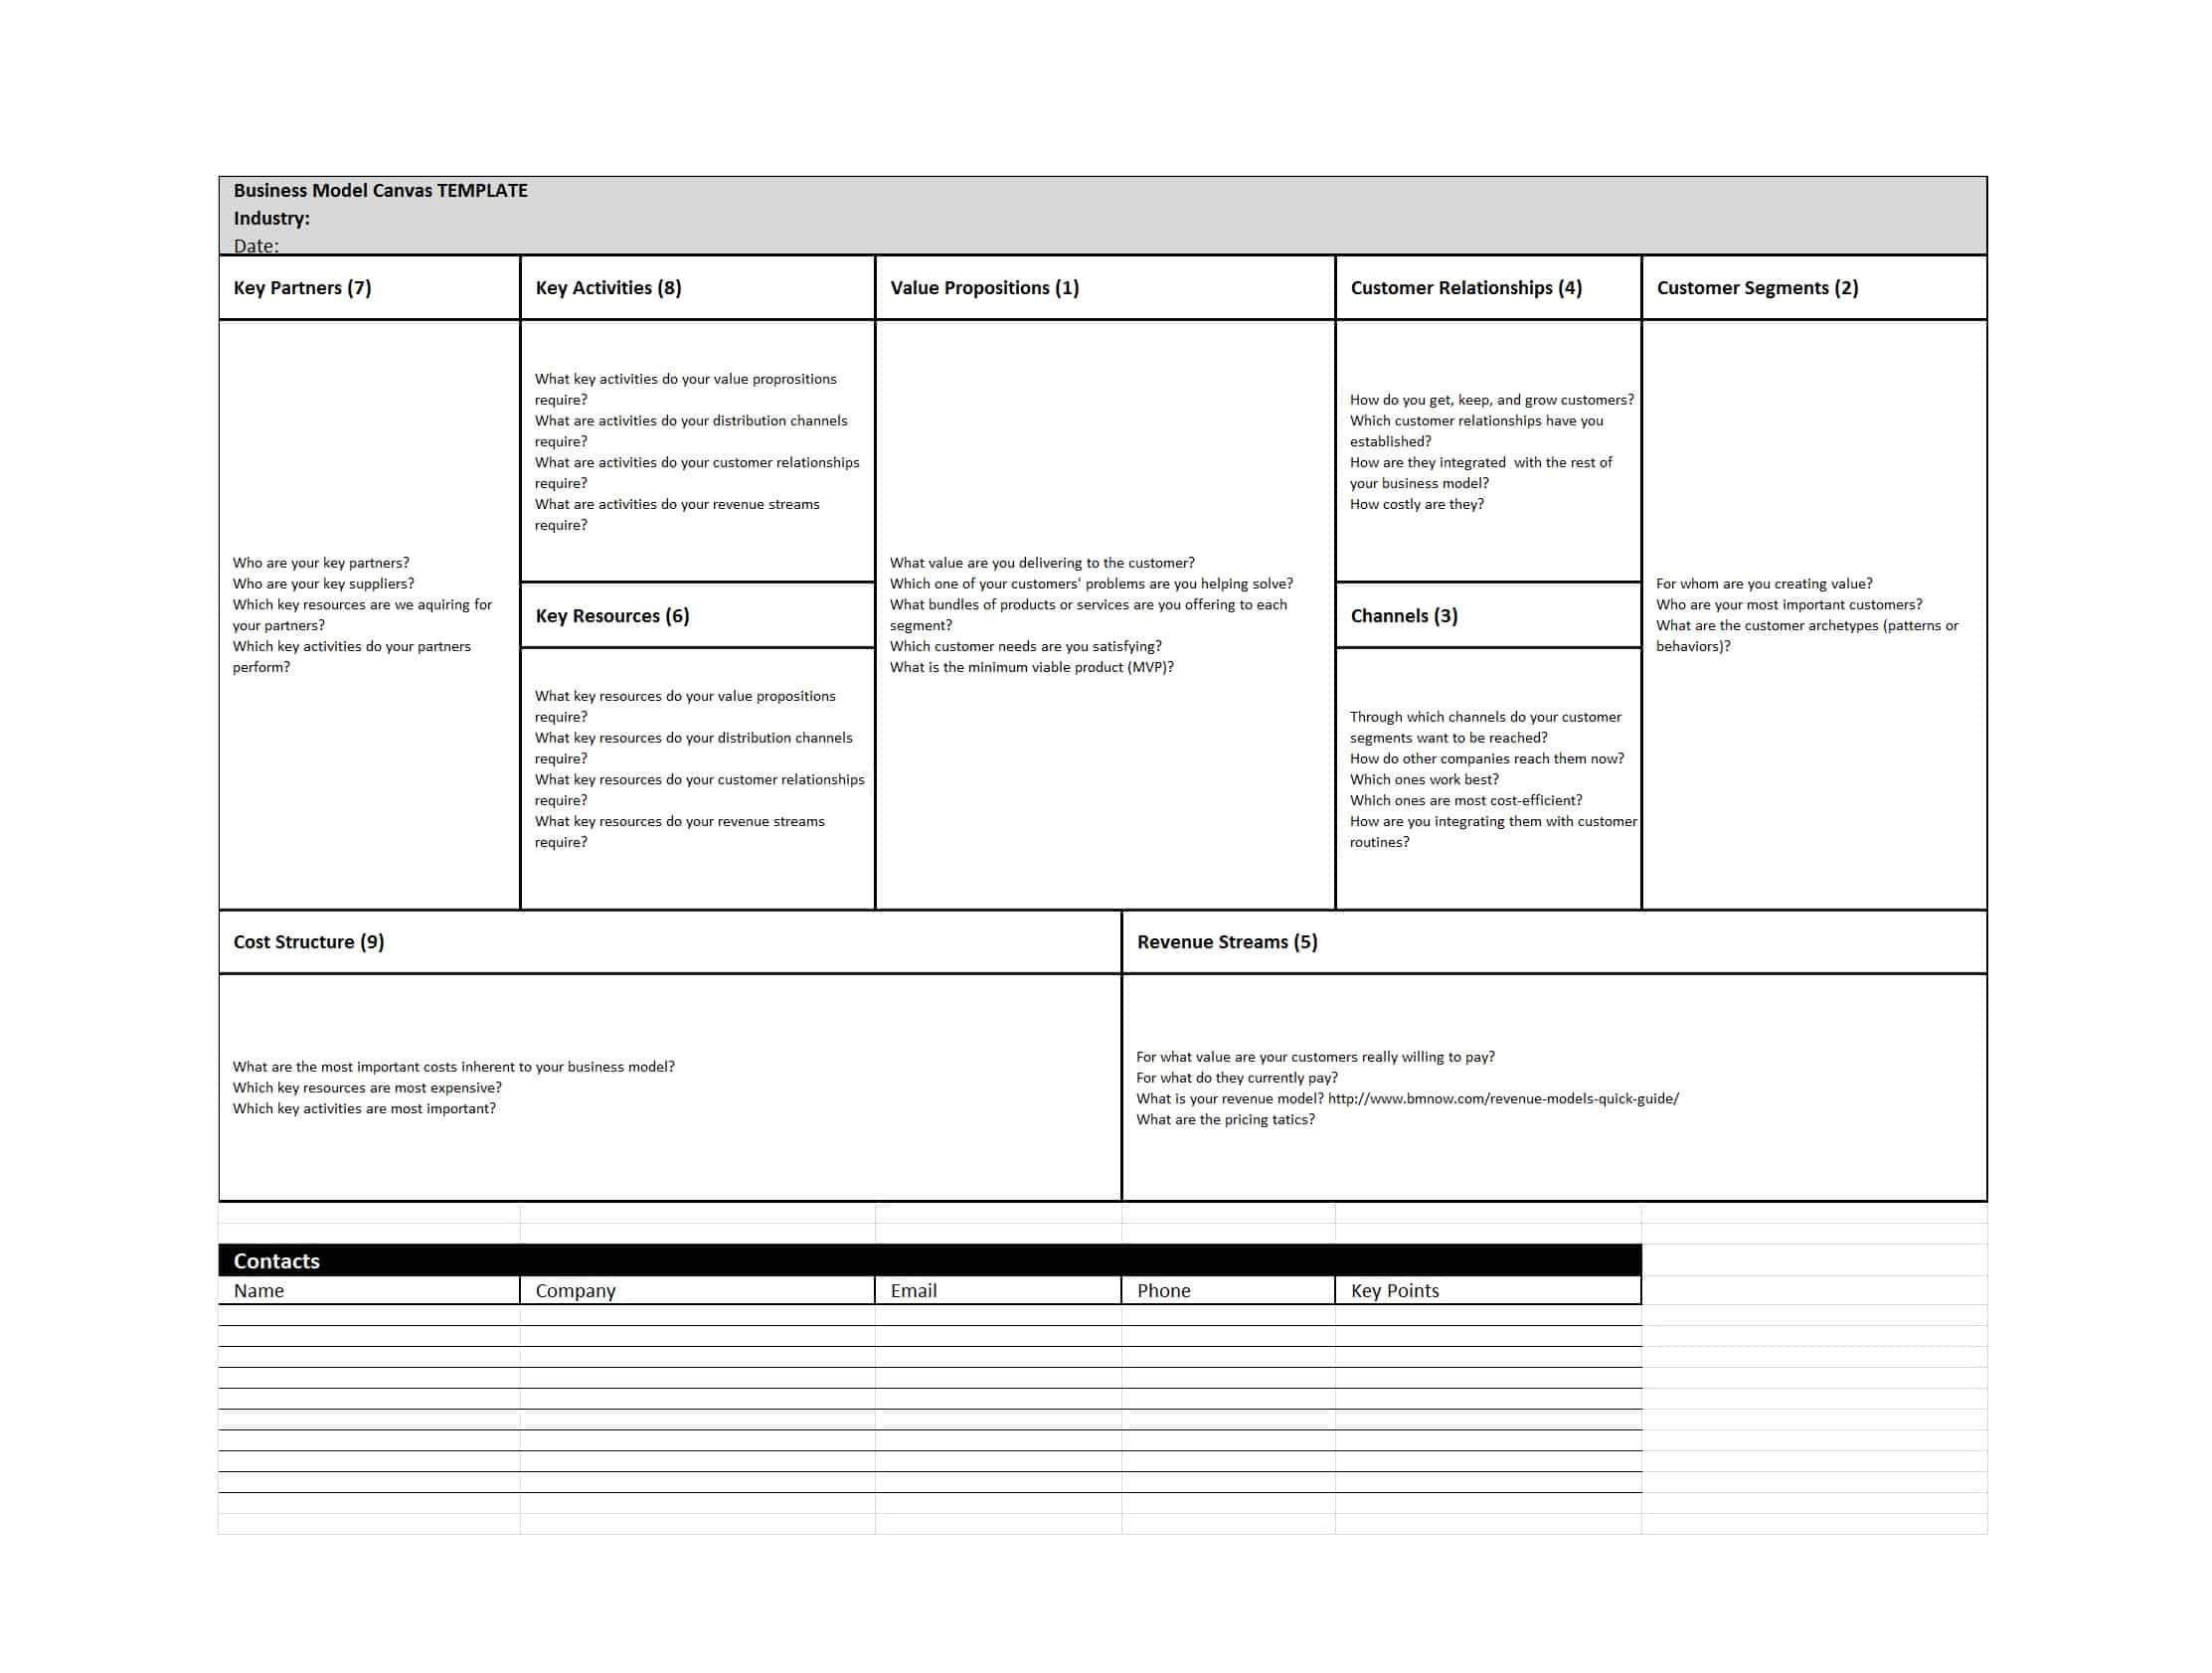 50 Amazing Business Model Canvas Templates ᐅ Template Lab Intended For Business Model Canvas Template Word